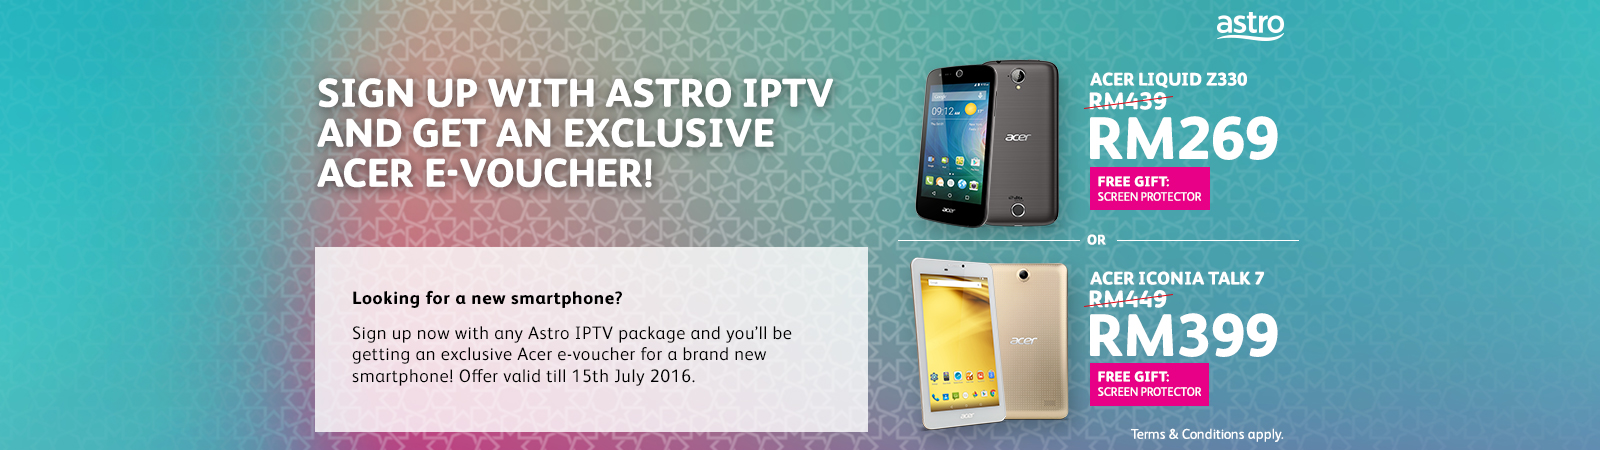 Get exclusive deals on Acer products when subscribing to Astro IPTV! 31